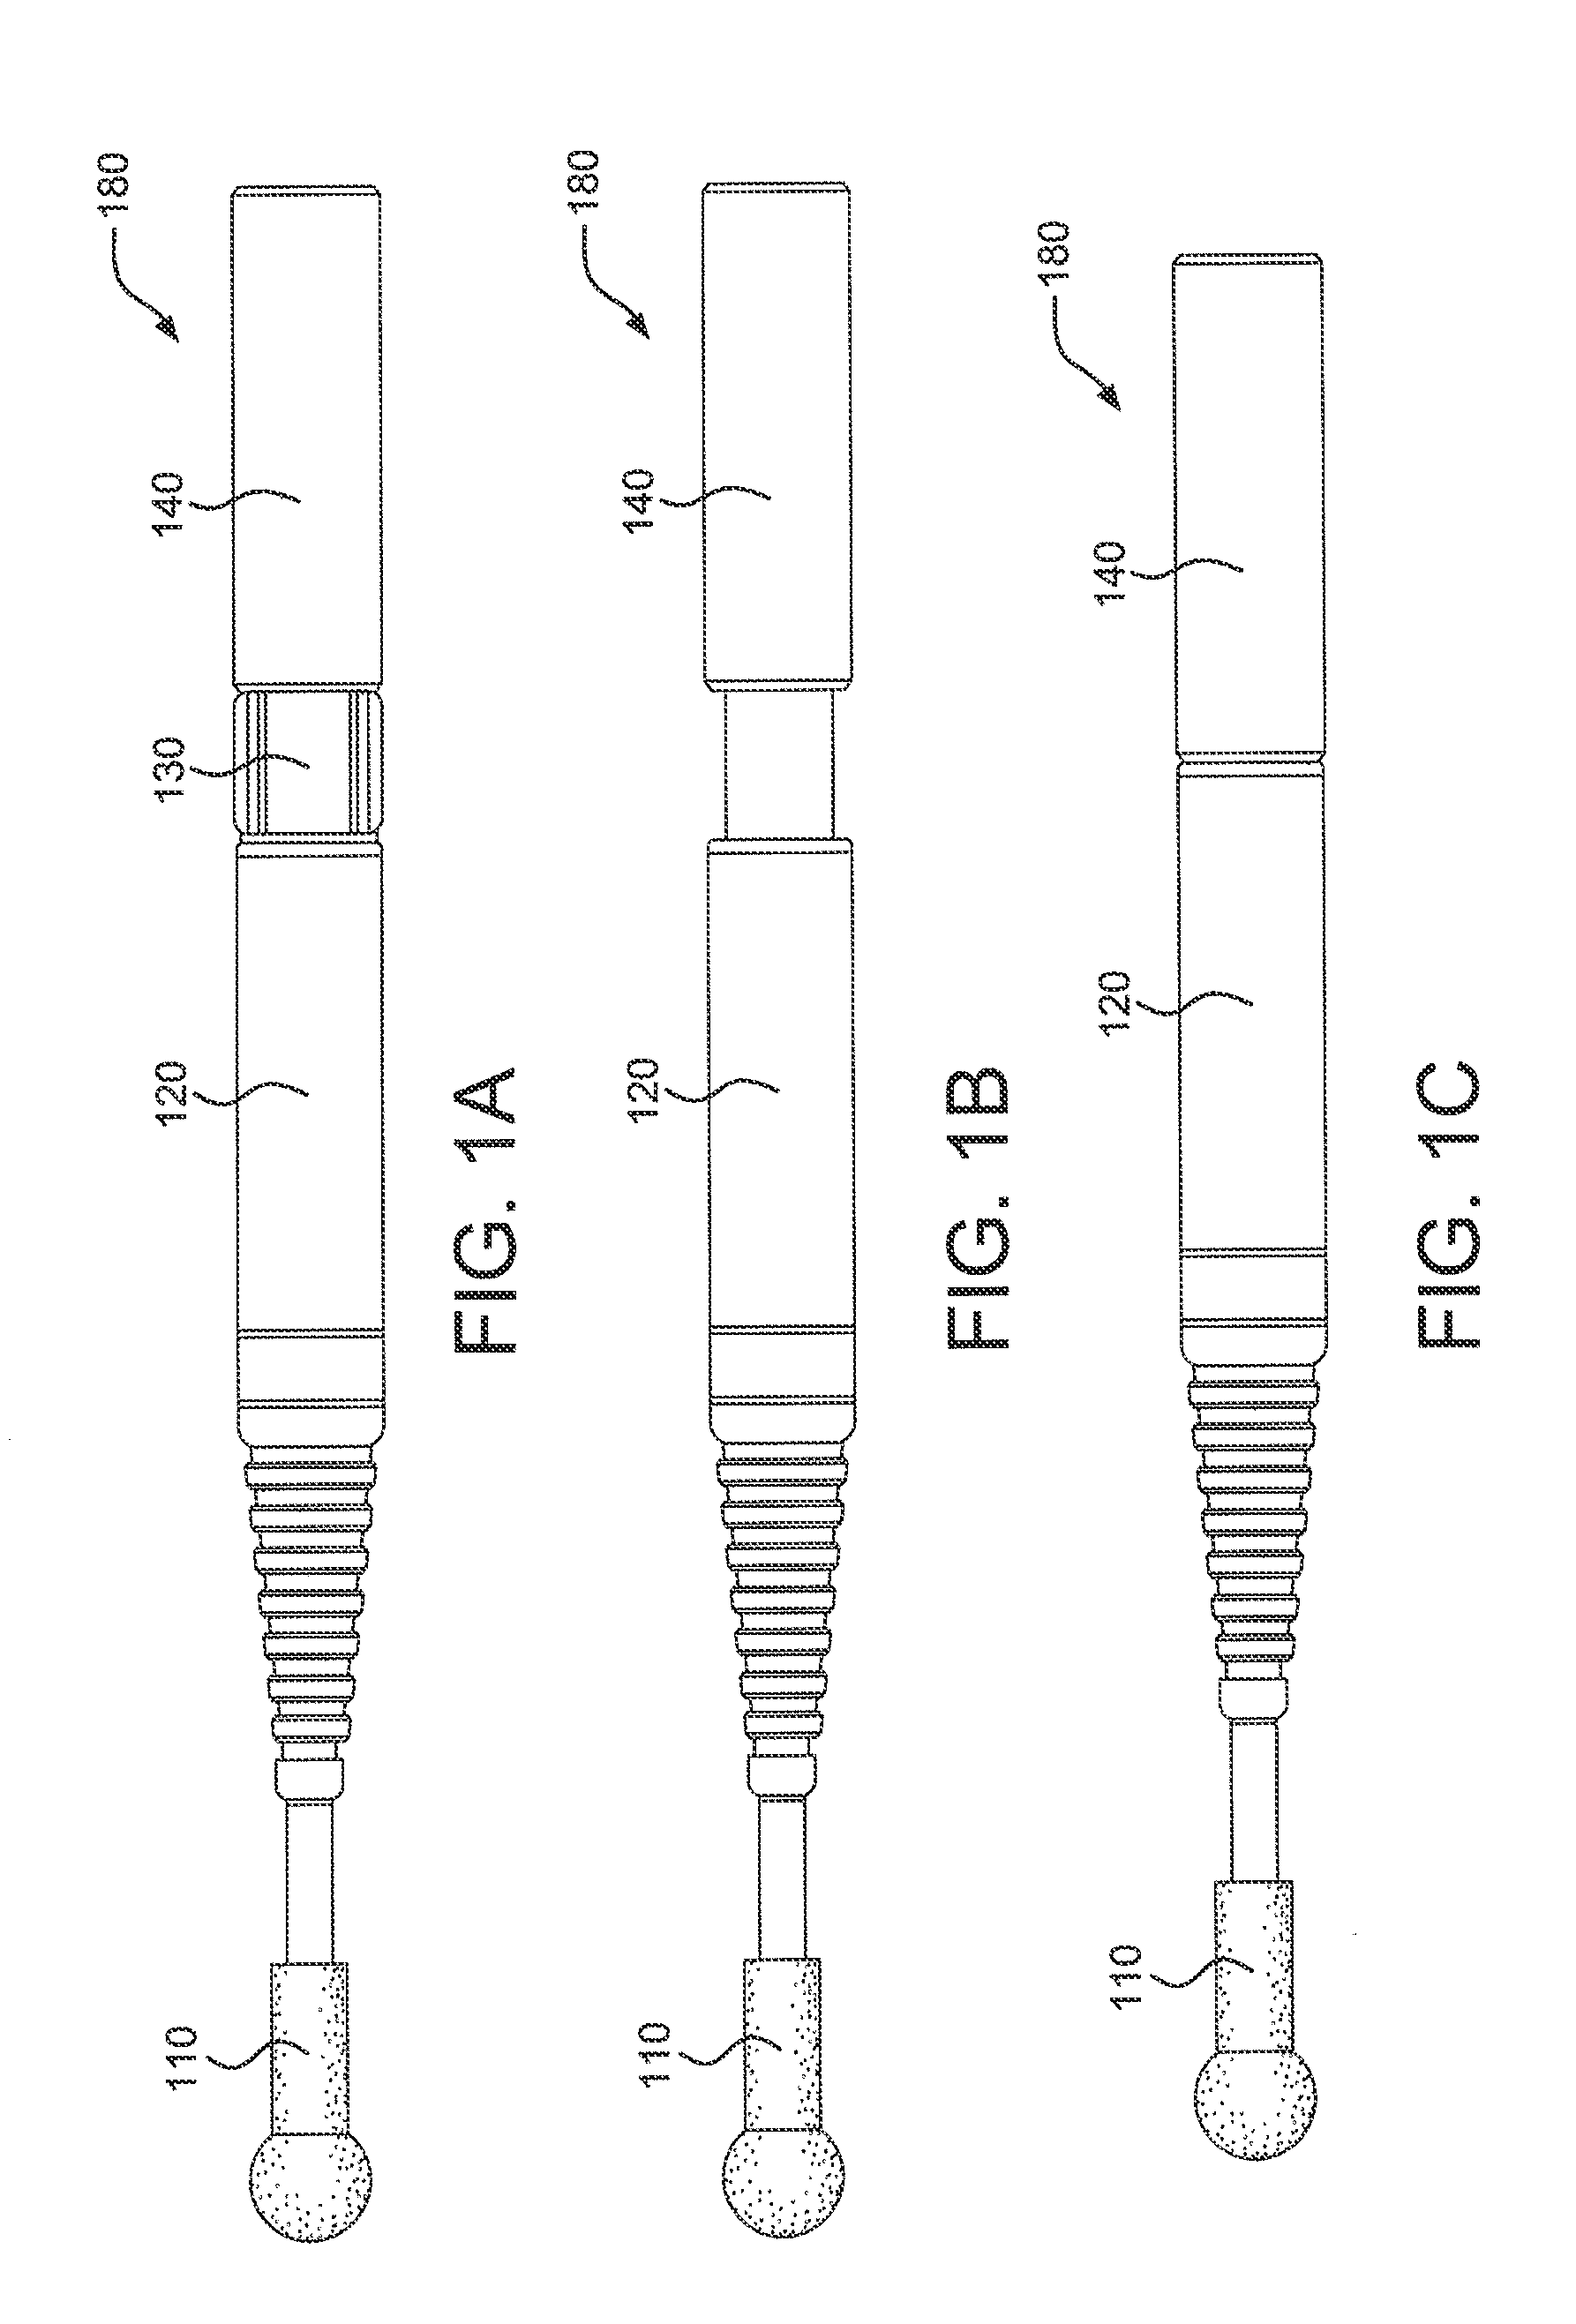 Applicators for storing sterilizing, and dispensing an adhesive